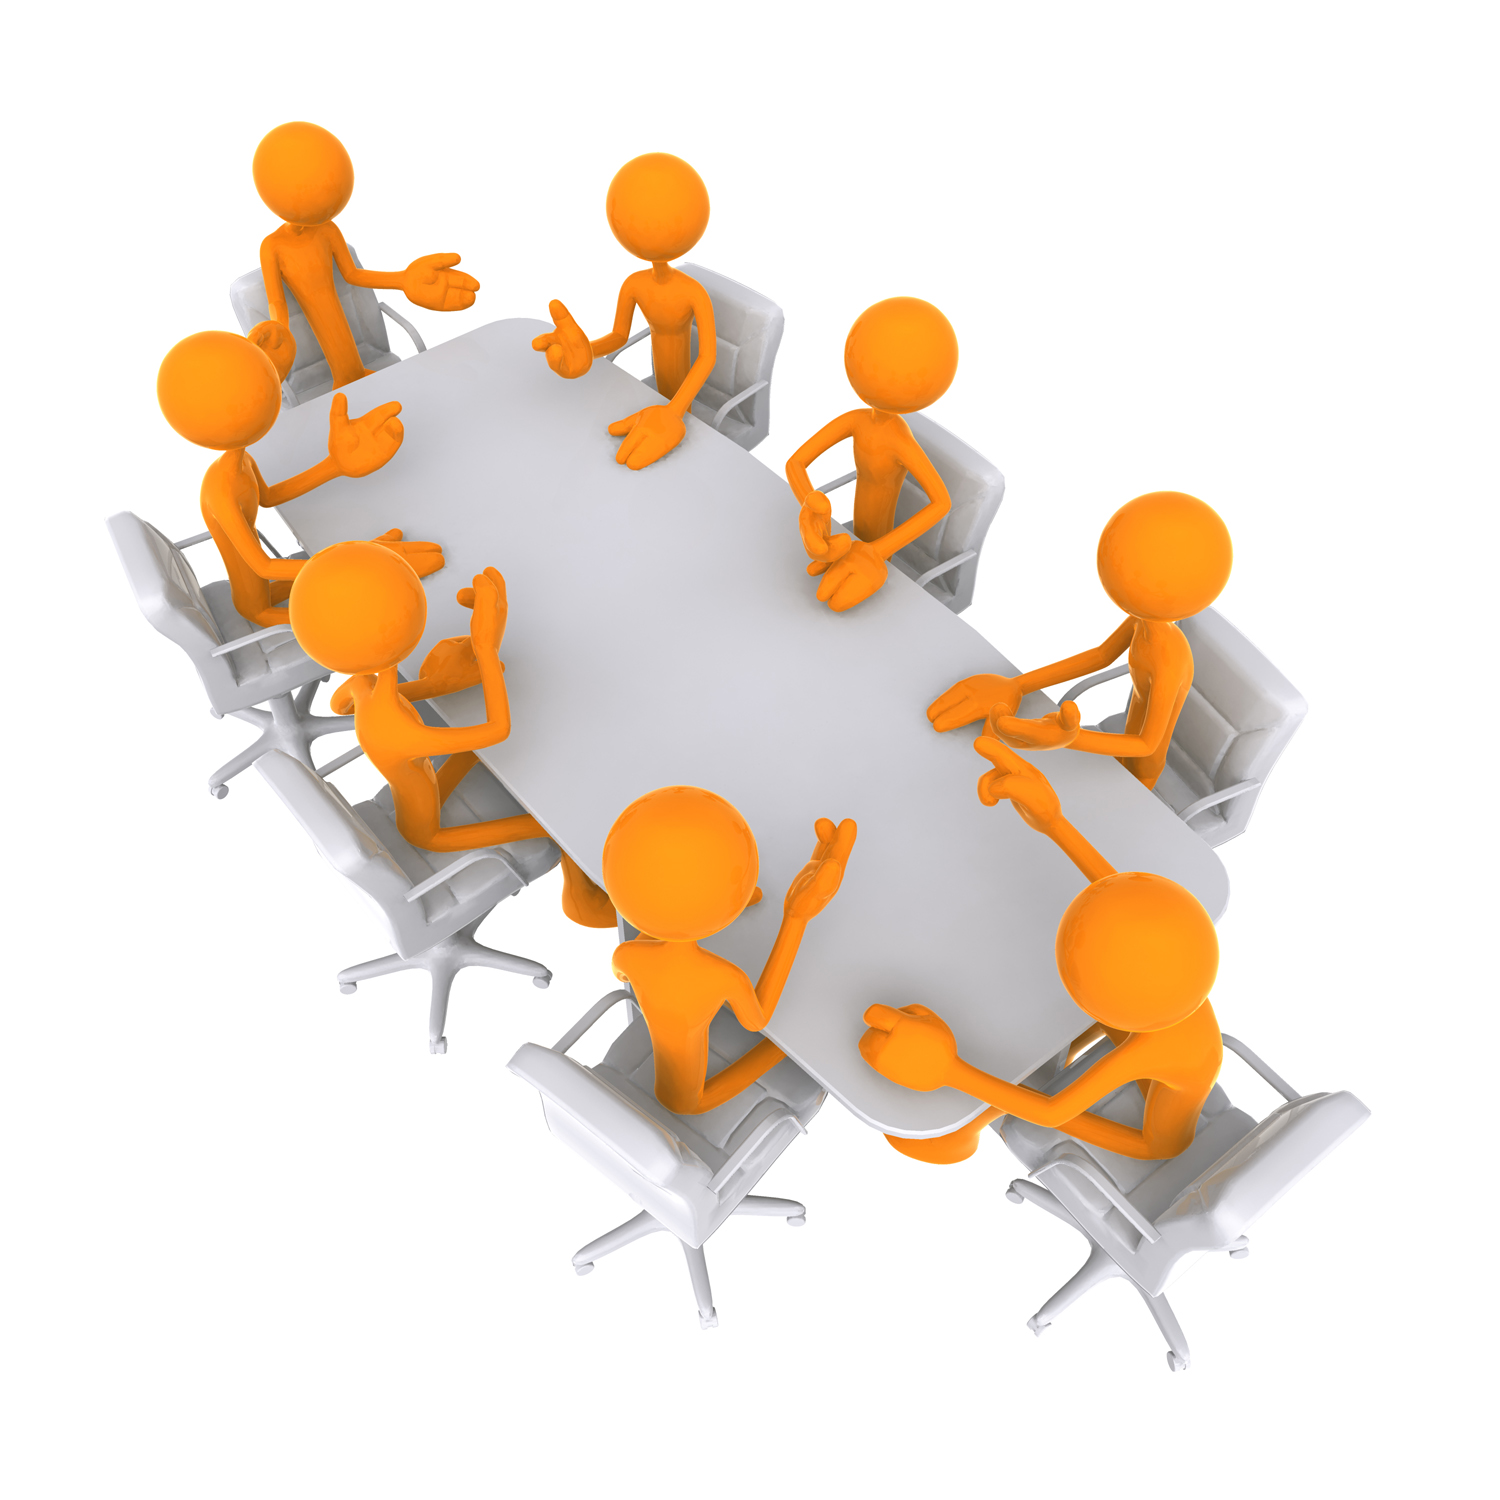 free clipart of business meetings - photo #47